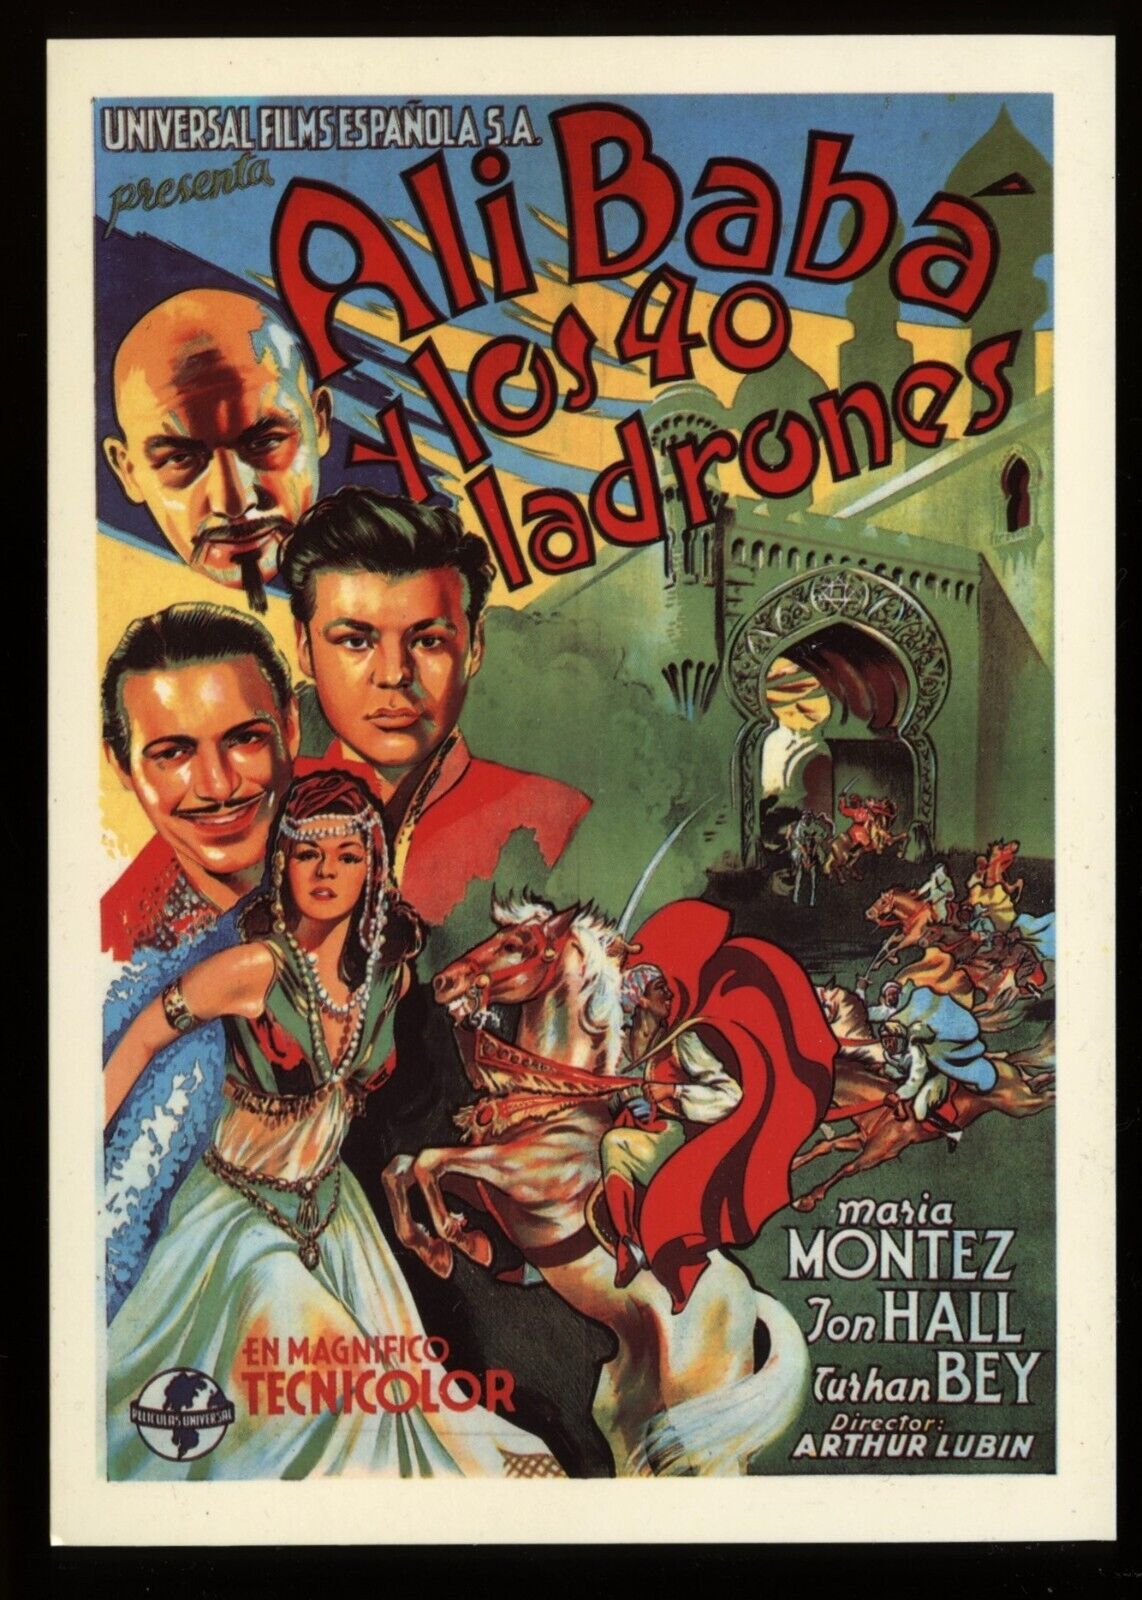 Ali Baba And The Forty Thieves Movie Cinema Film Spanish Poster Art Postcard